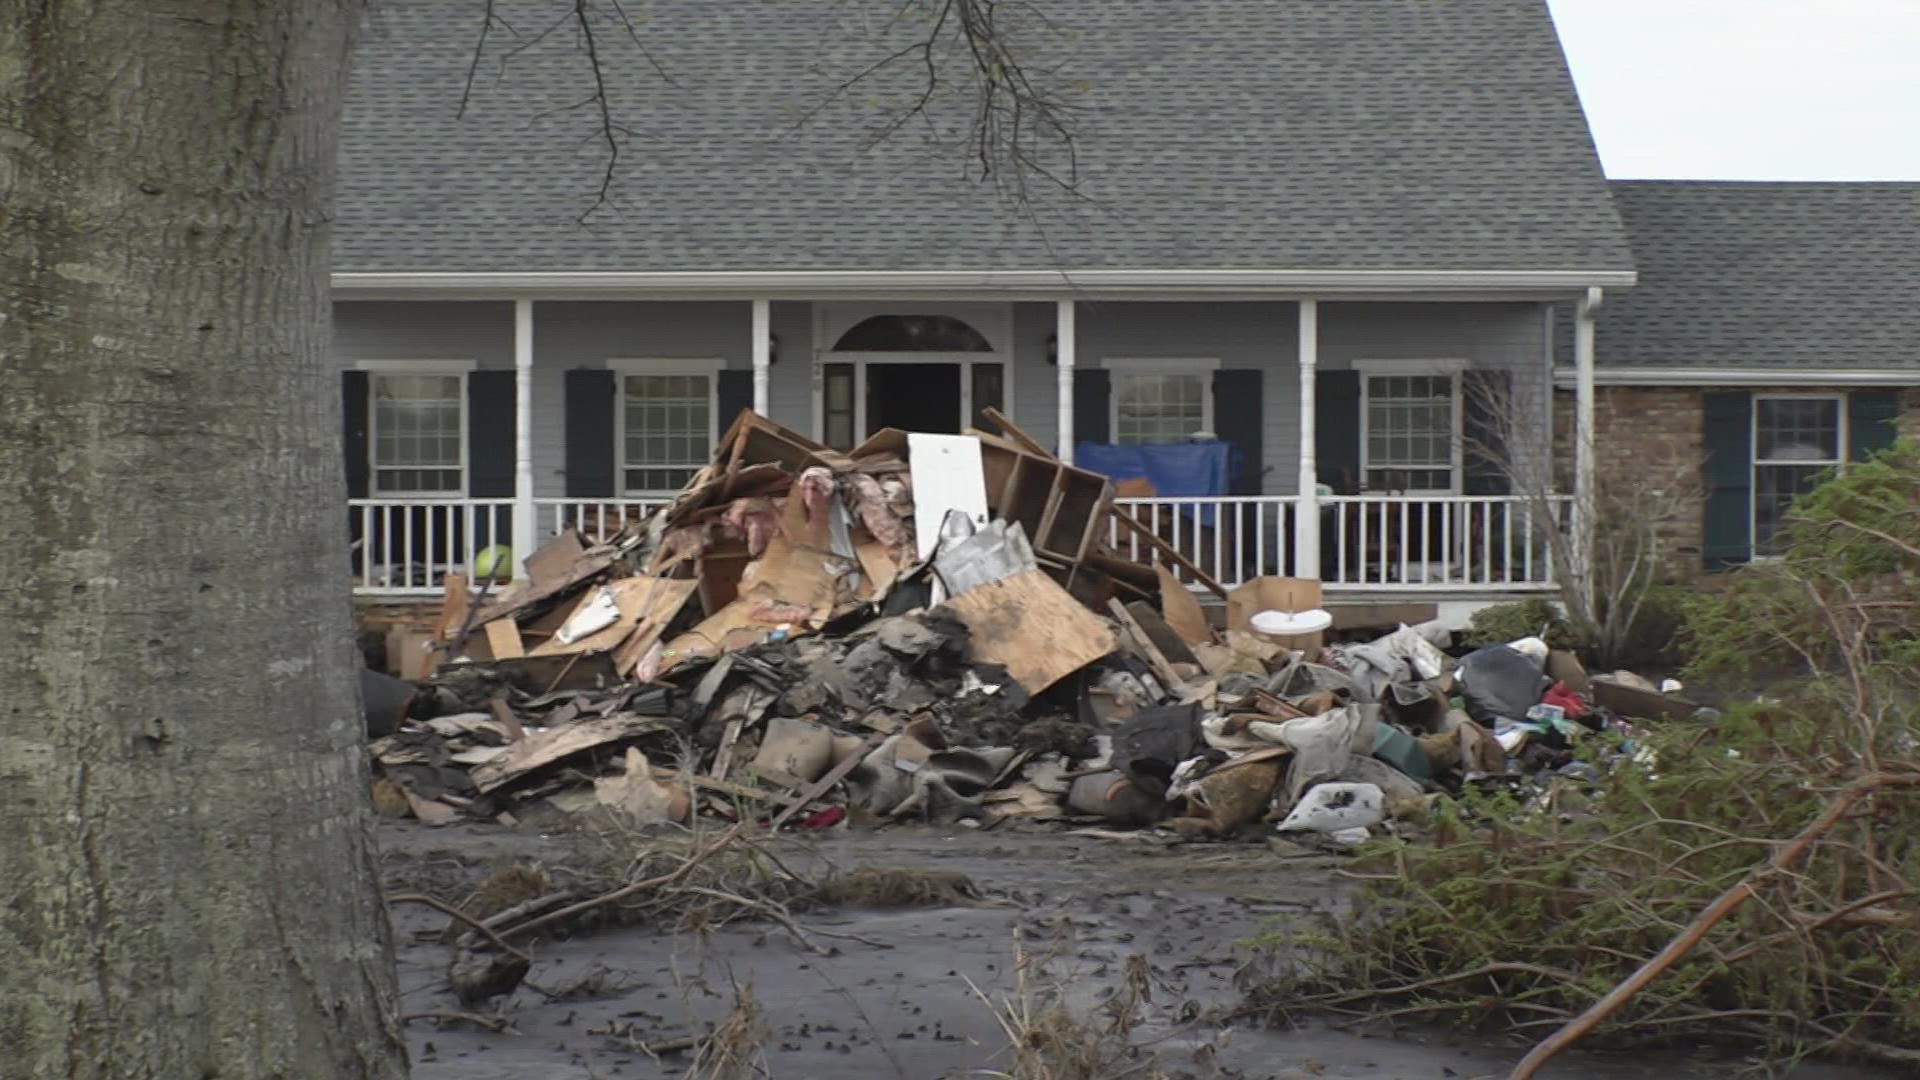 A home that once had a lush green lawn is now nothing but mud and dead fish after Hurricane Ida brought a surge and flooded the area and homes.